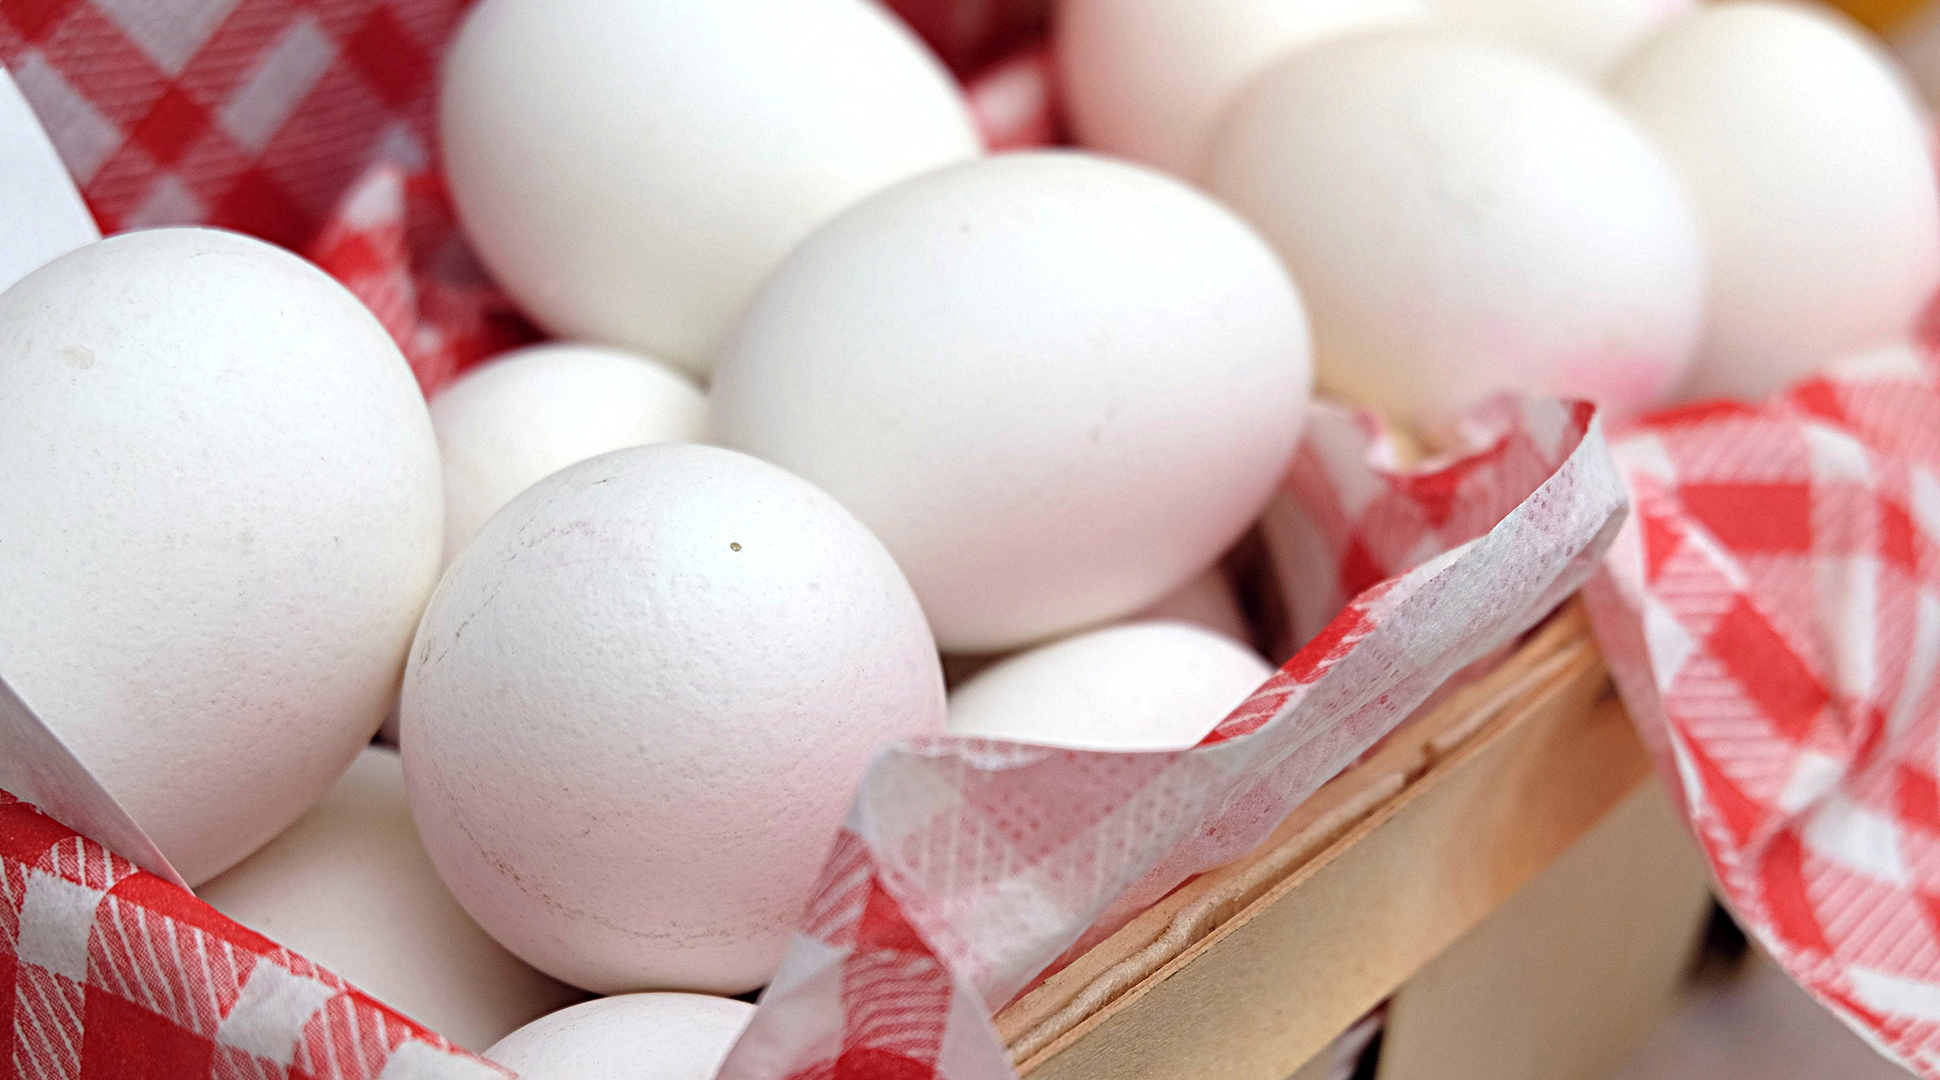 Are eggs healthy?